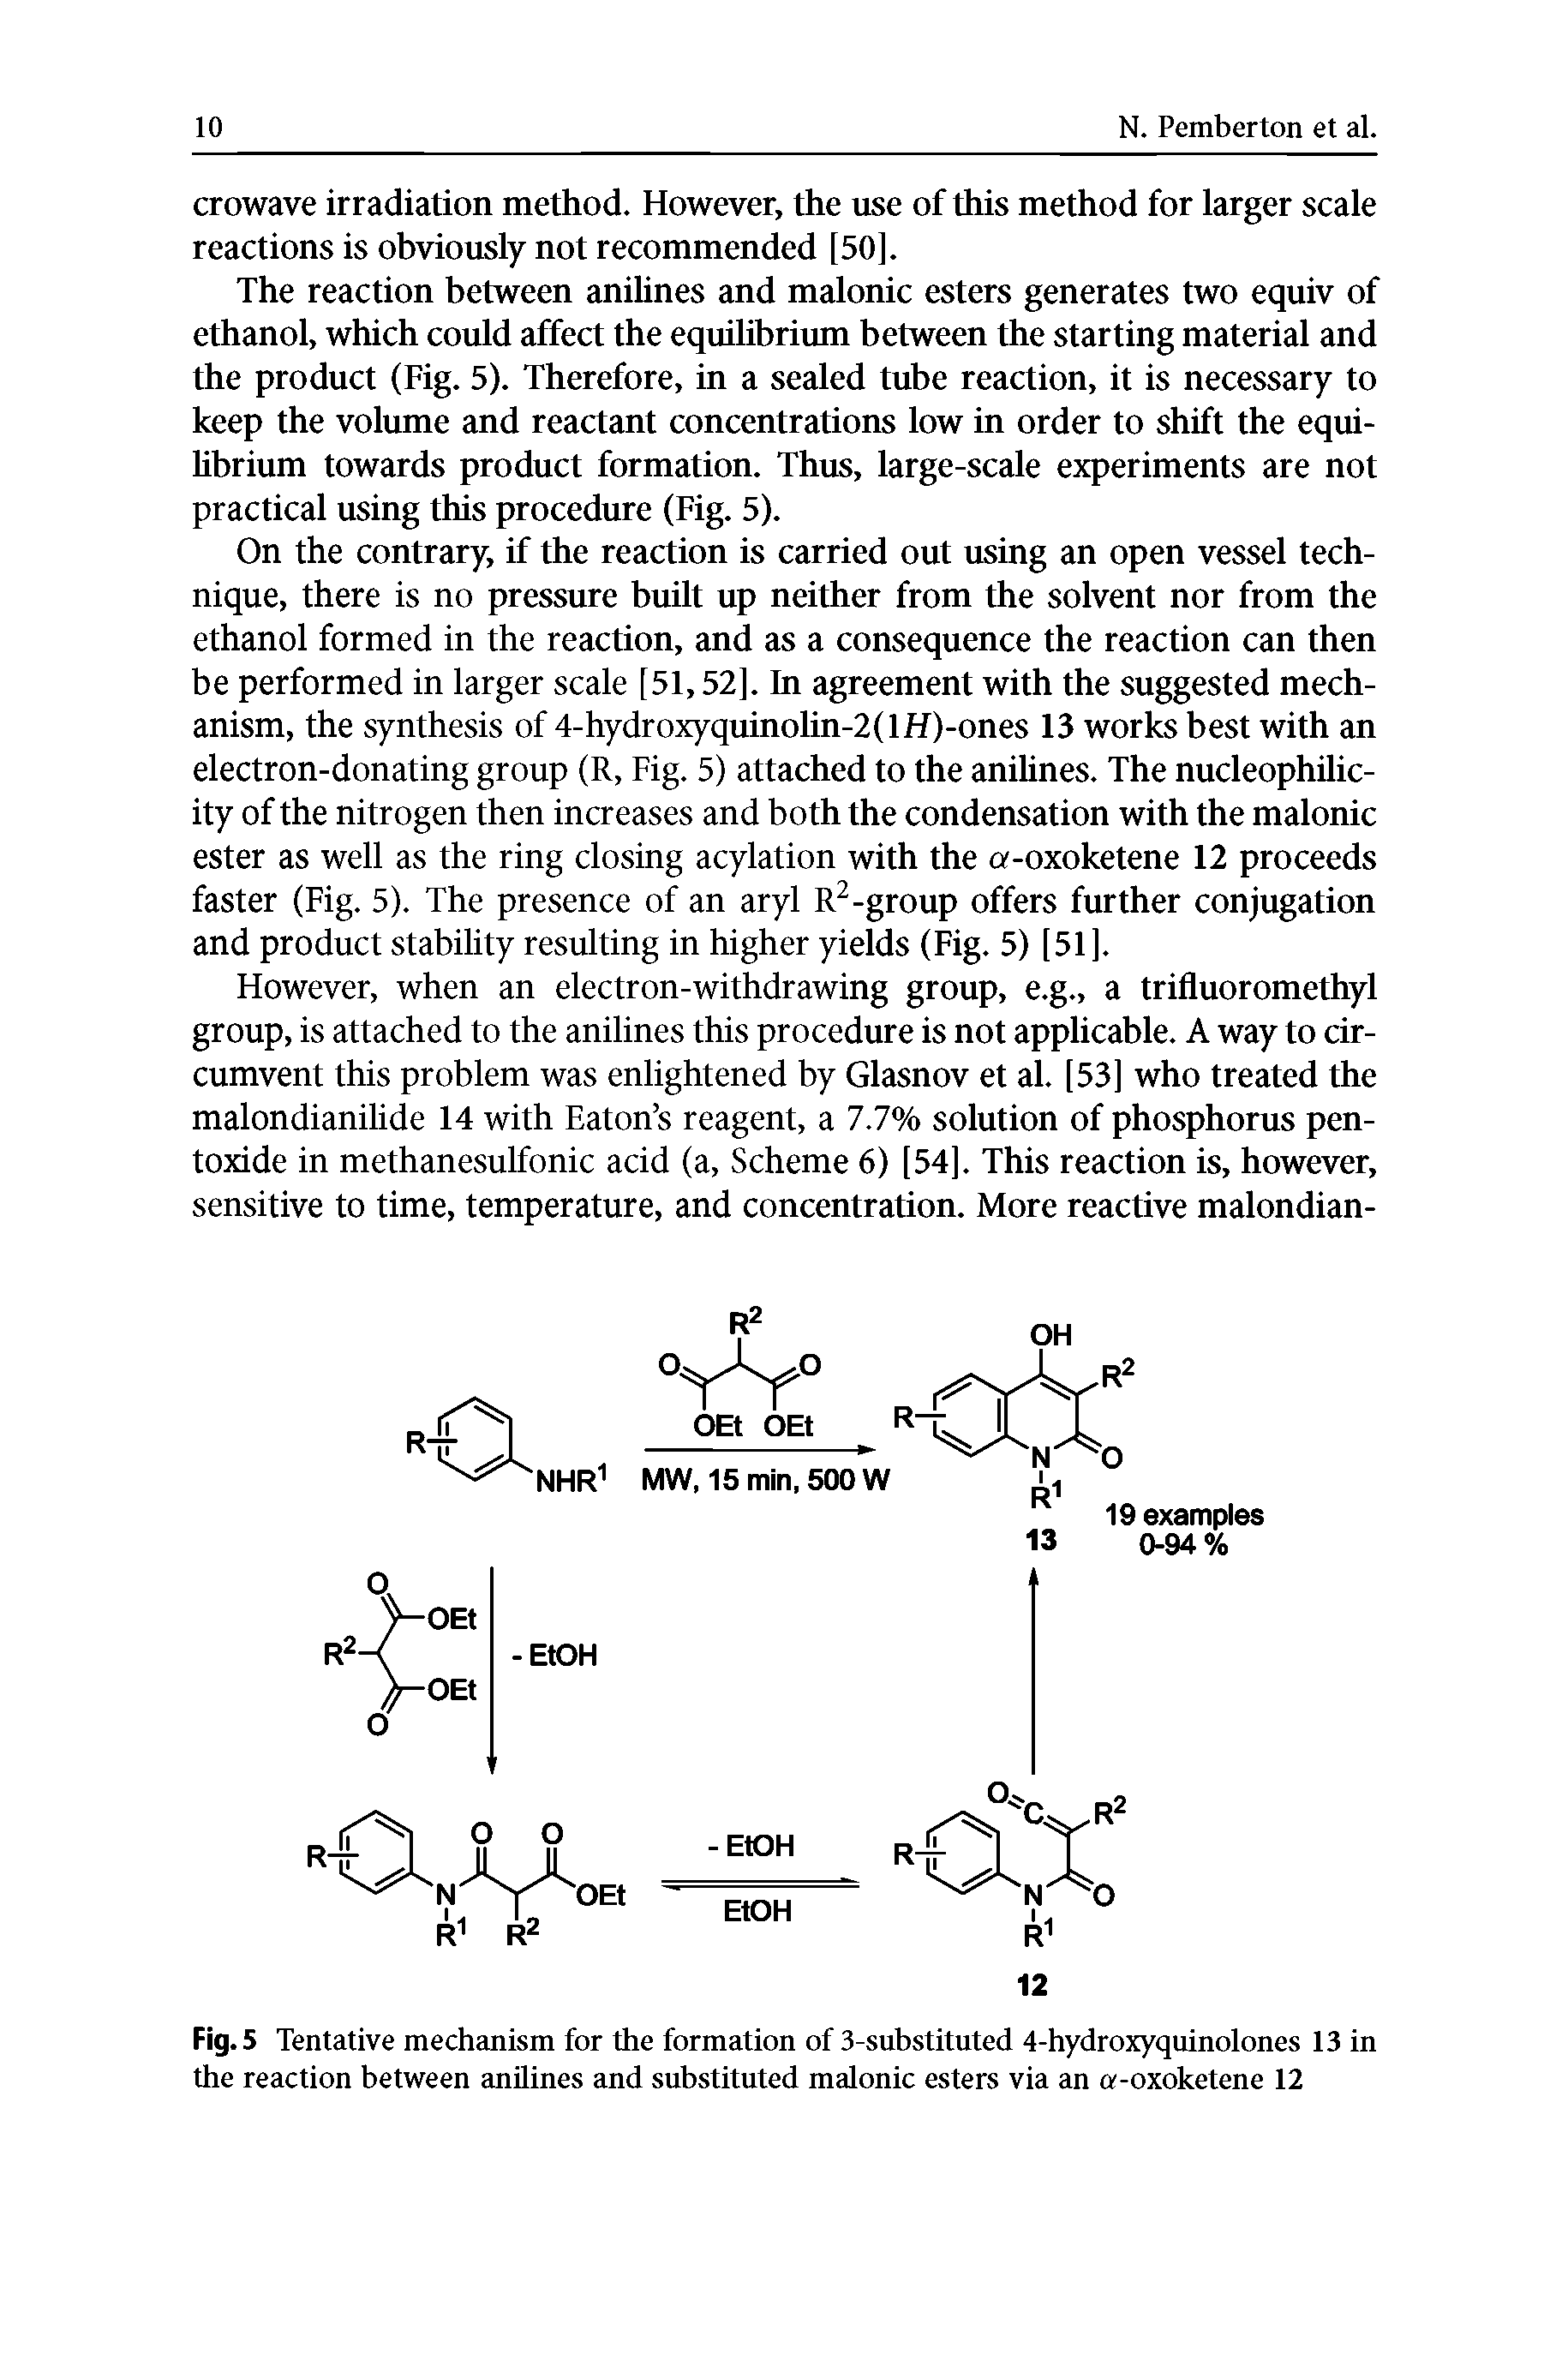 Fig. 5 Tentative mechanism for the formation of 3-substituted 4-hydroxyquinolones 13 in the reaction between anilines and substituted malonic esters via an a-oxoketene 12...